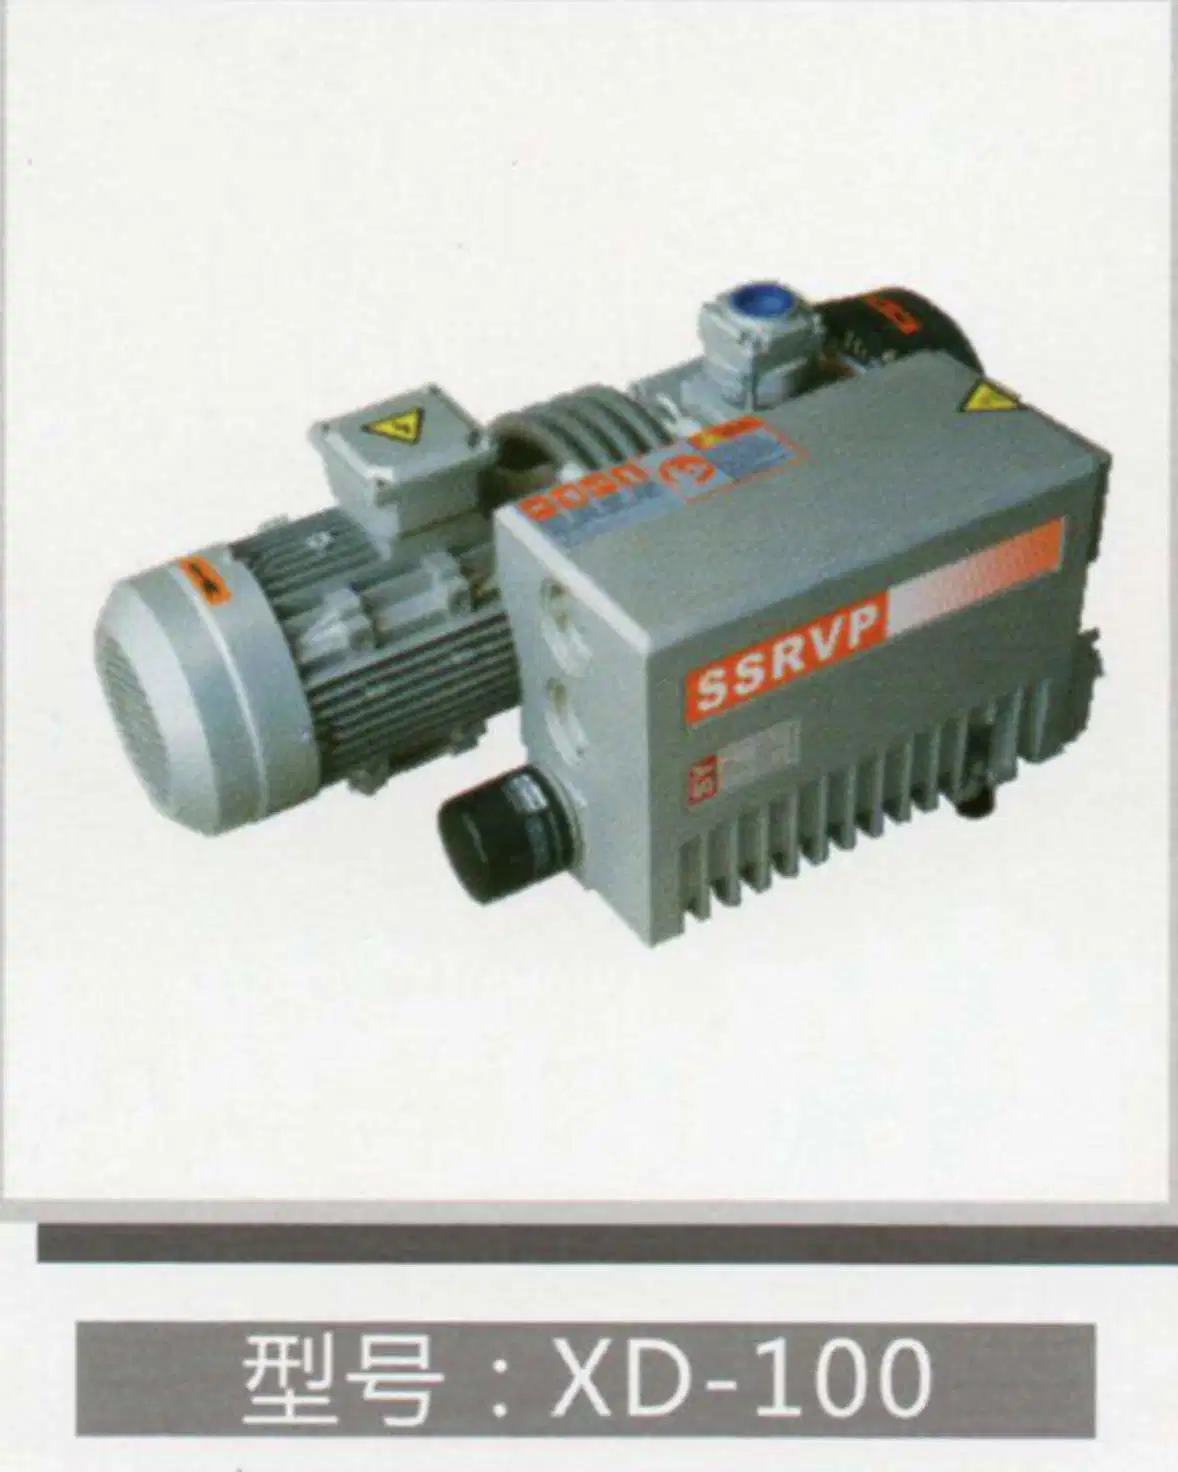 Oil Silent Rotary Vane Vacuum Pump for Vacuum Distillation, Concentration, Drying and Other Processes in Food Manufacturer